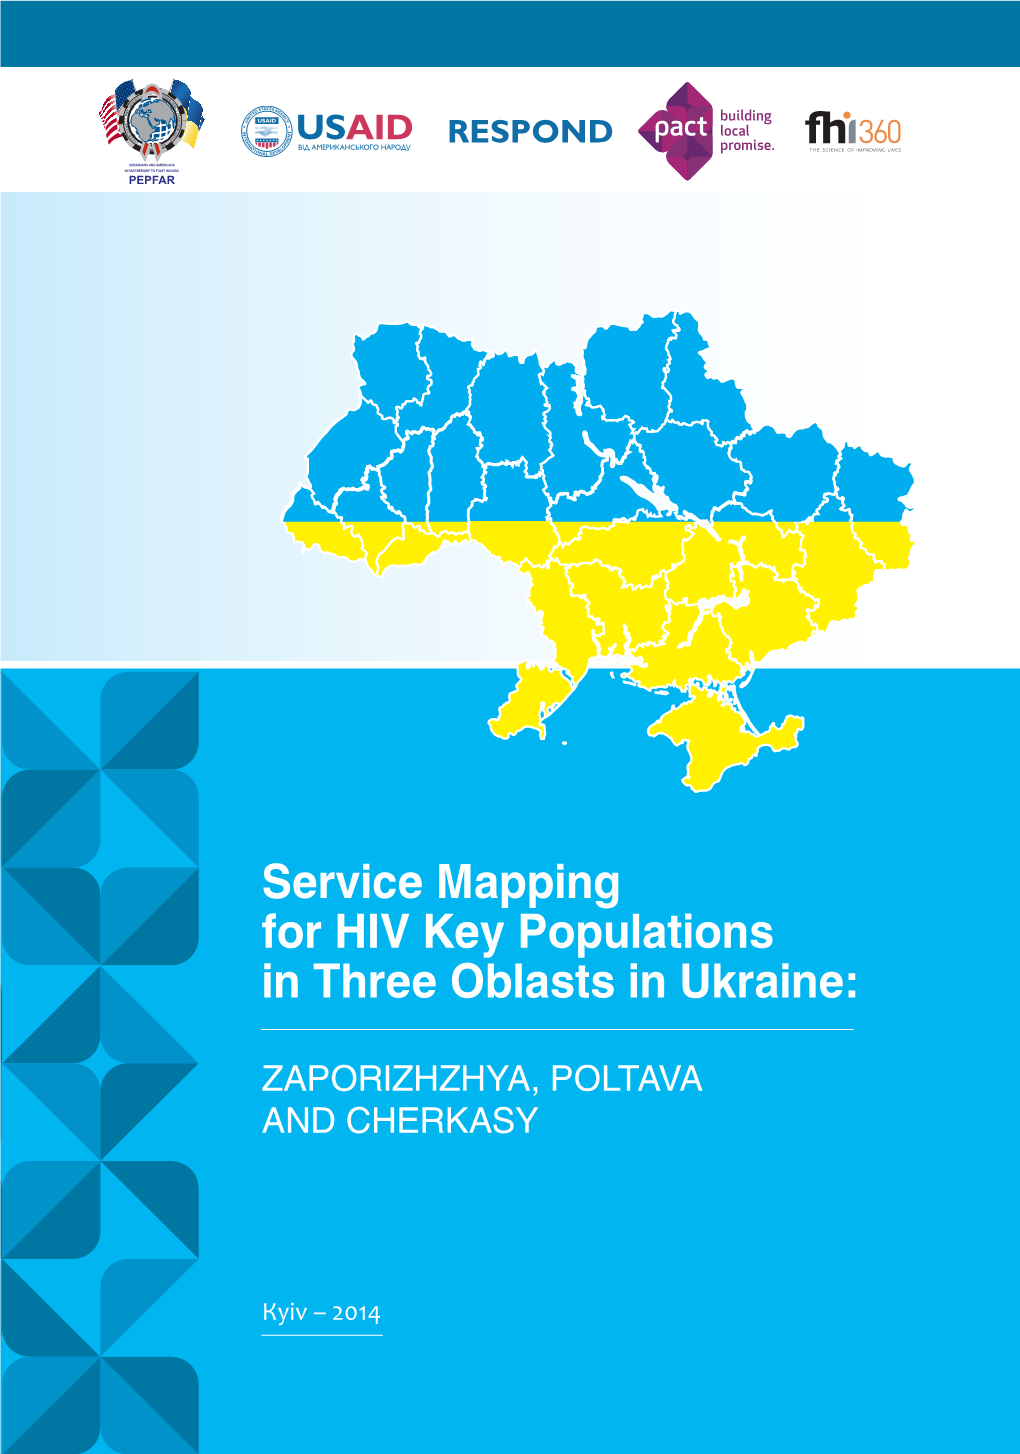 Service Mapping for HIV Key Populations in Three Oblasts in Ukraine